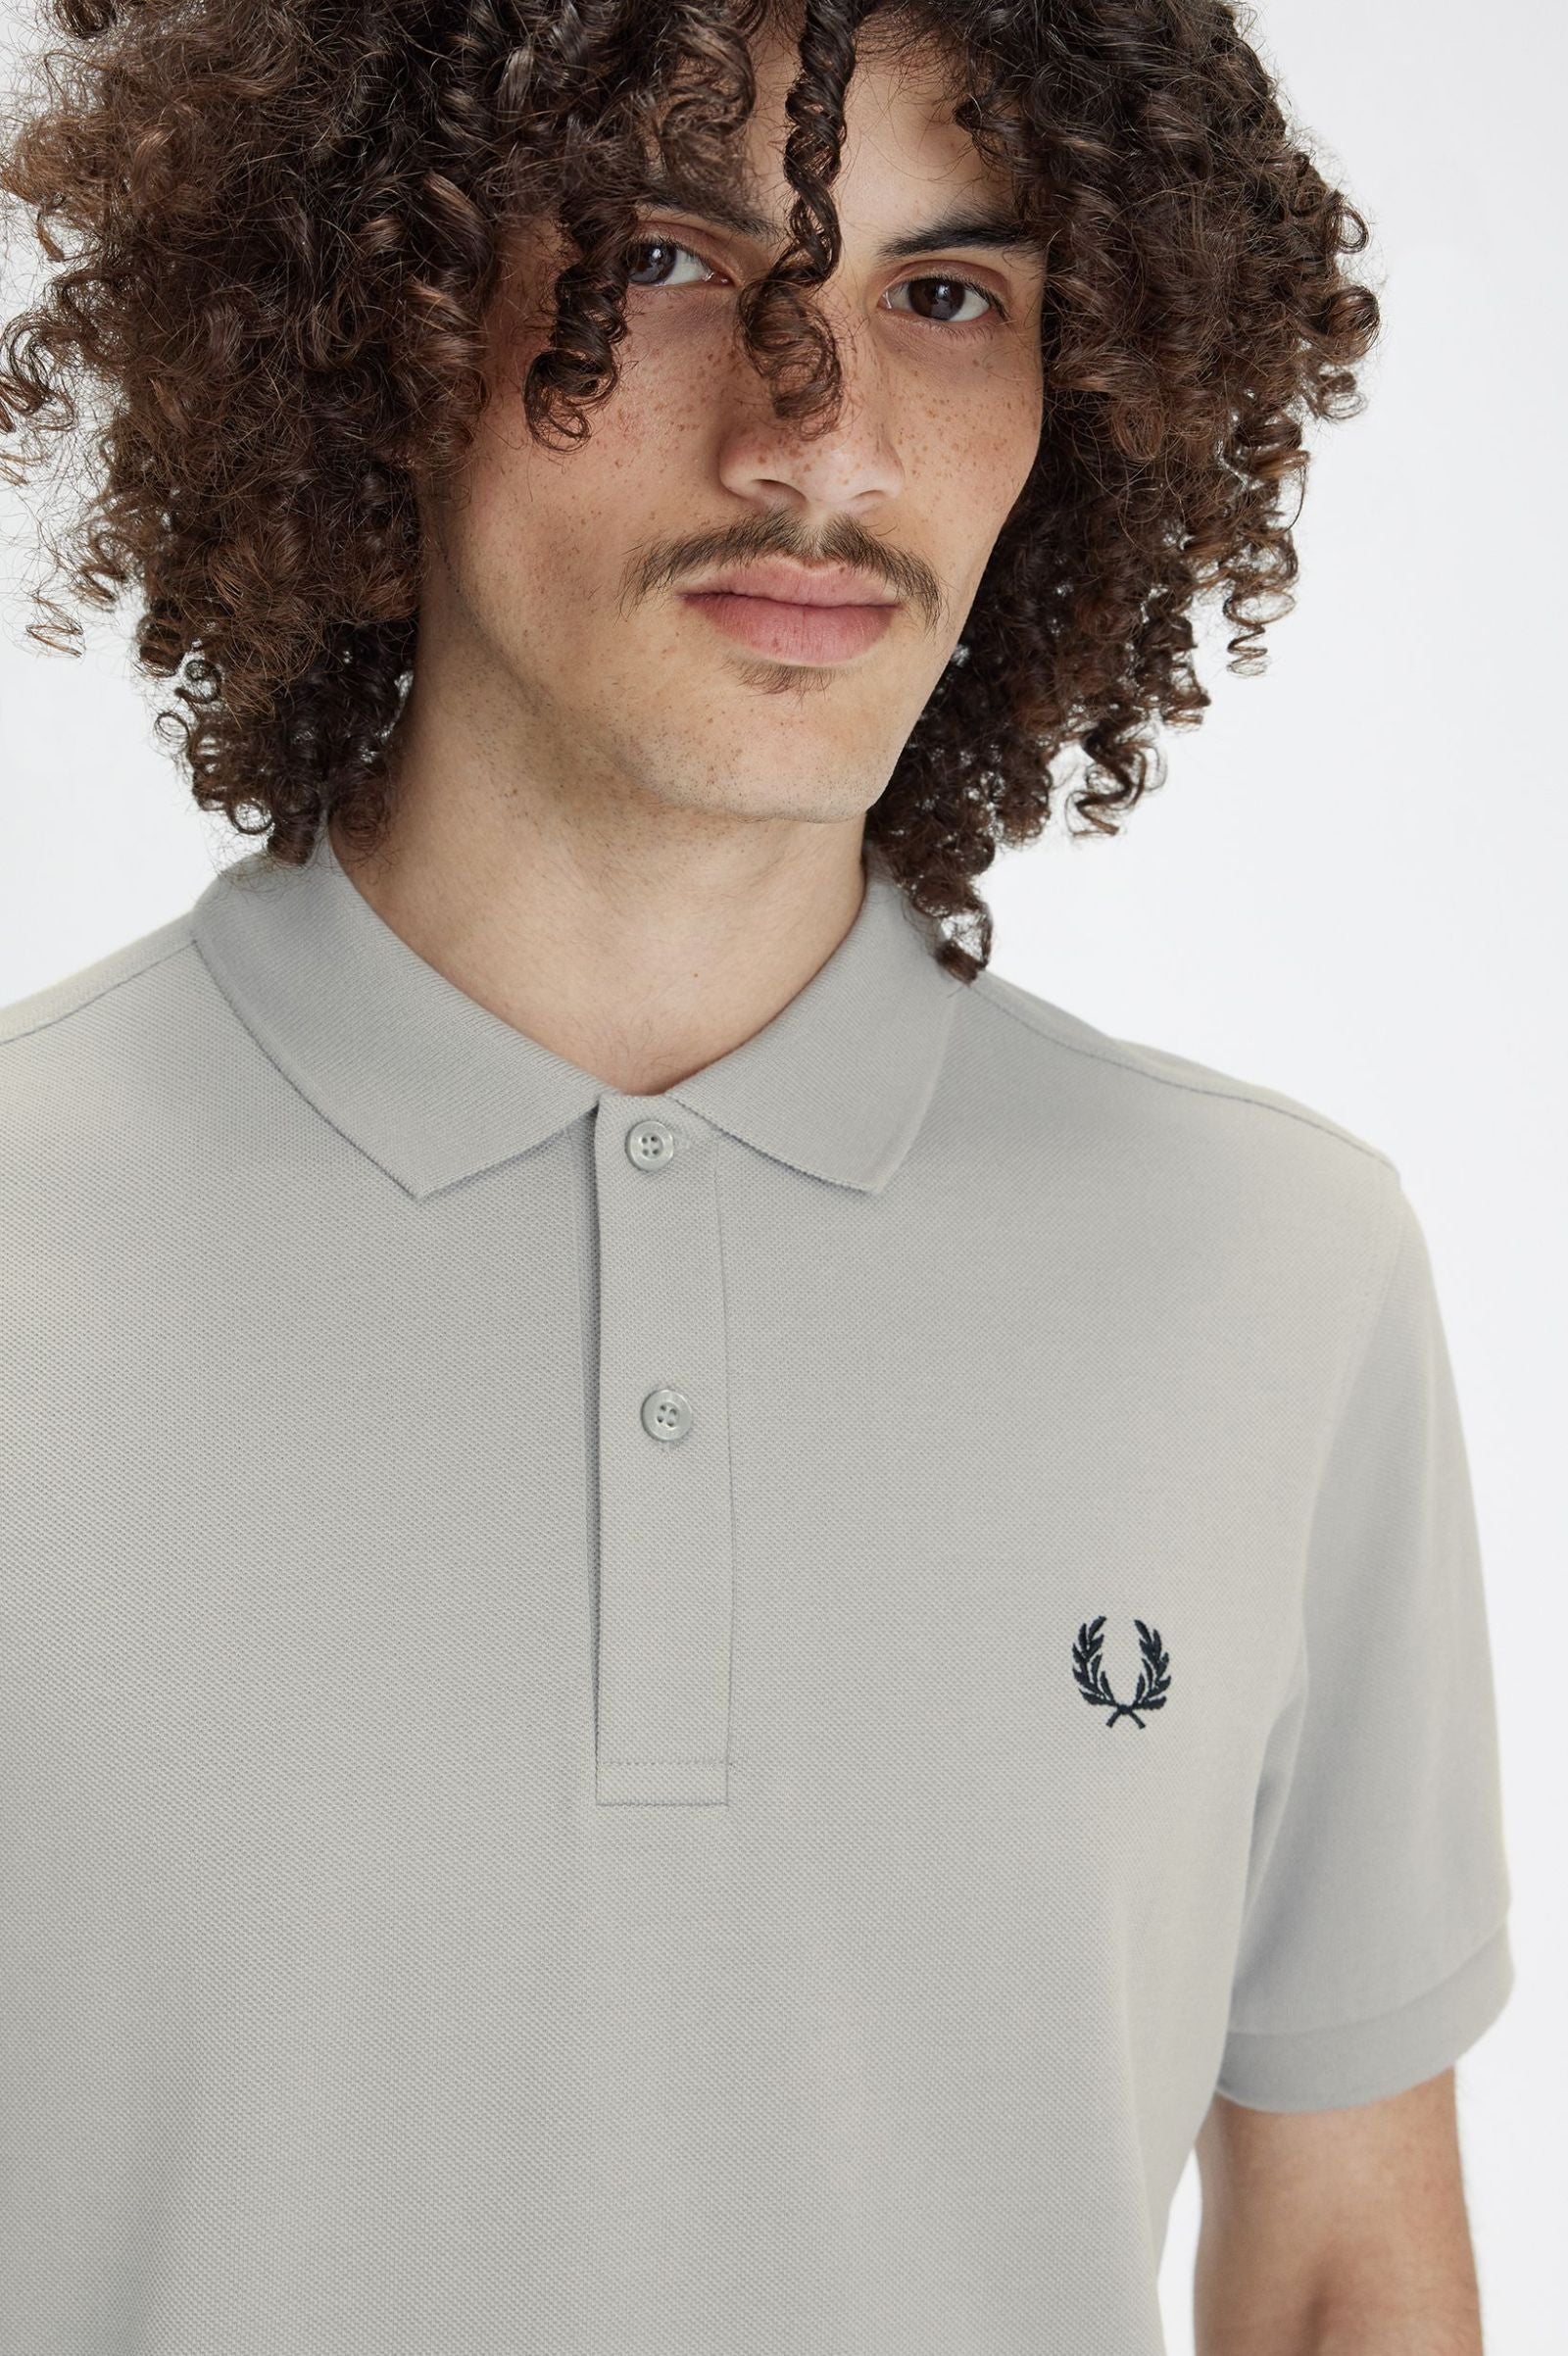 Fred Perry Polo M6000 color caliza y negro hombre